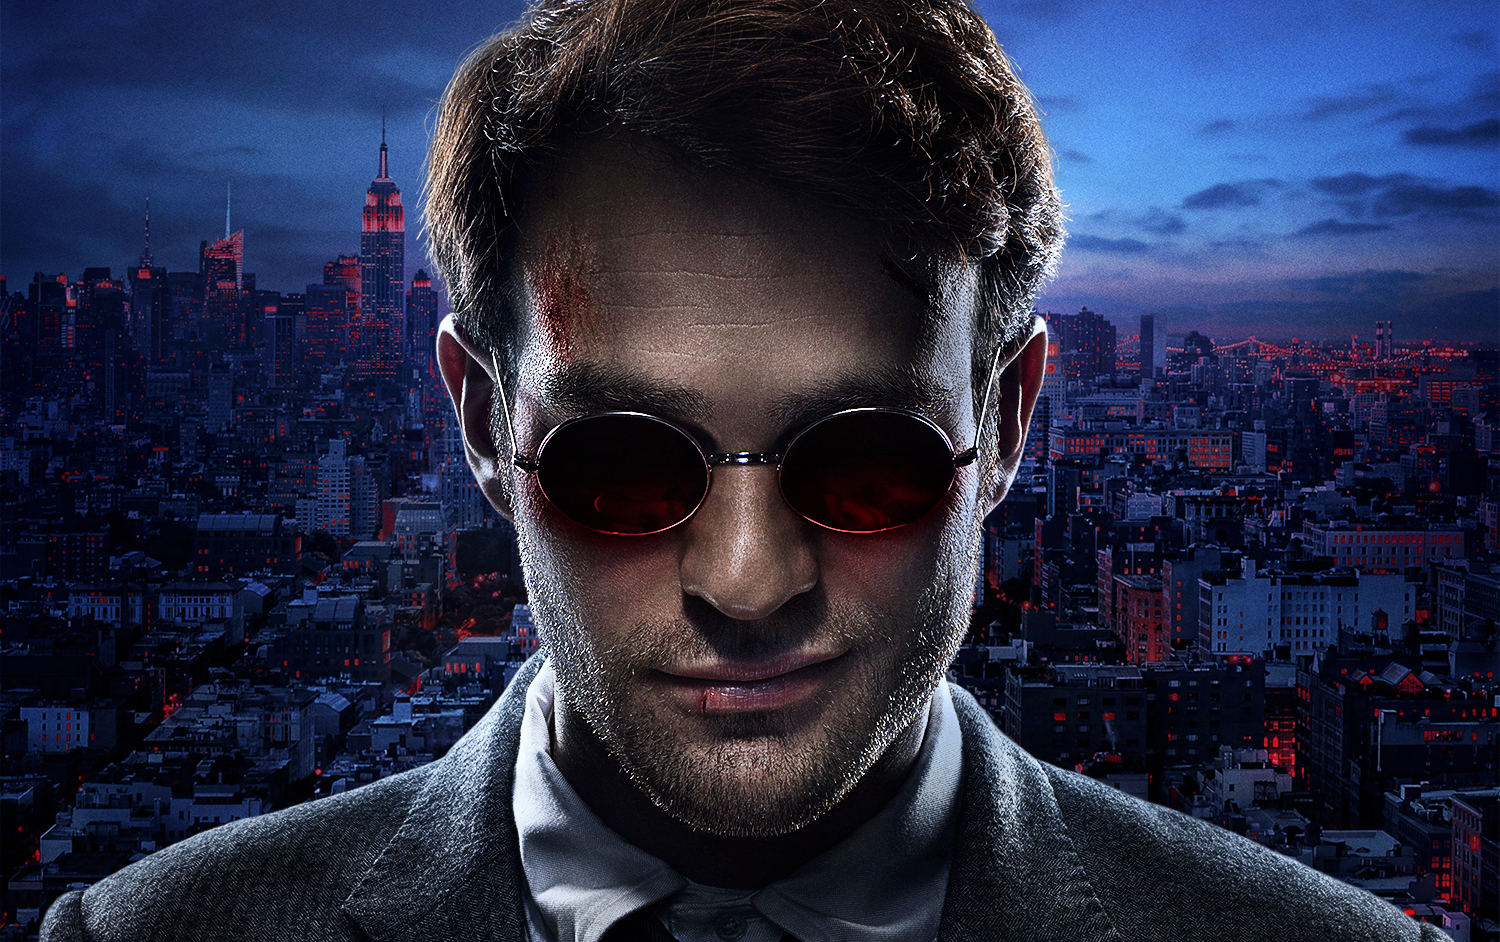 Charlie Cox as Daredevil in Marvel's Daredevil on Netflix, which may get a reboot on Disney+